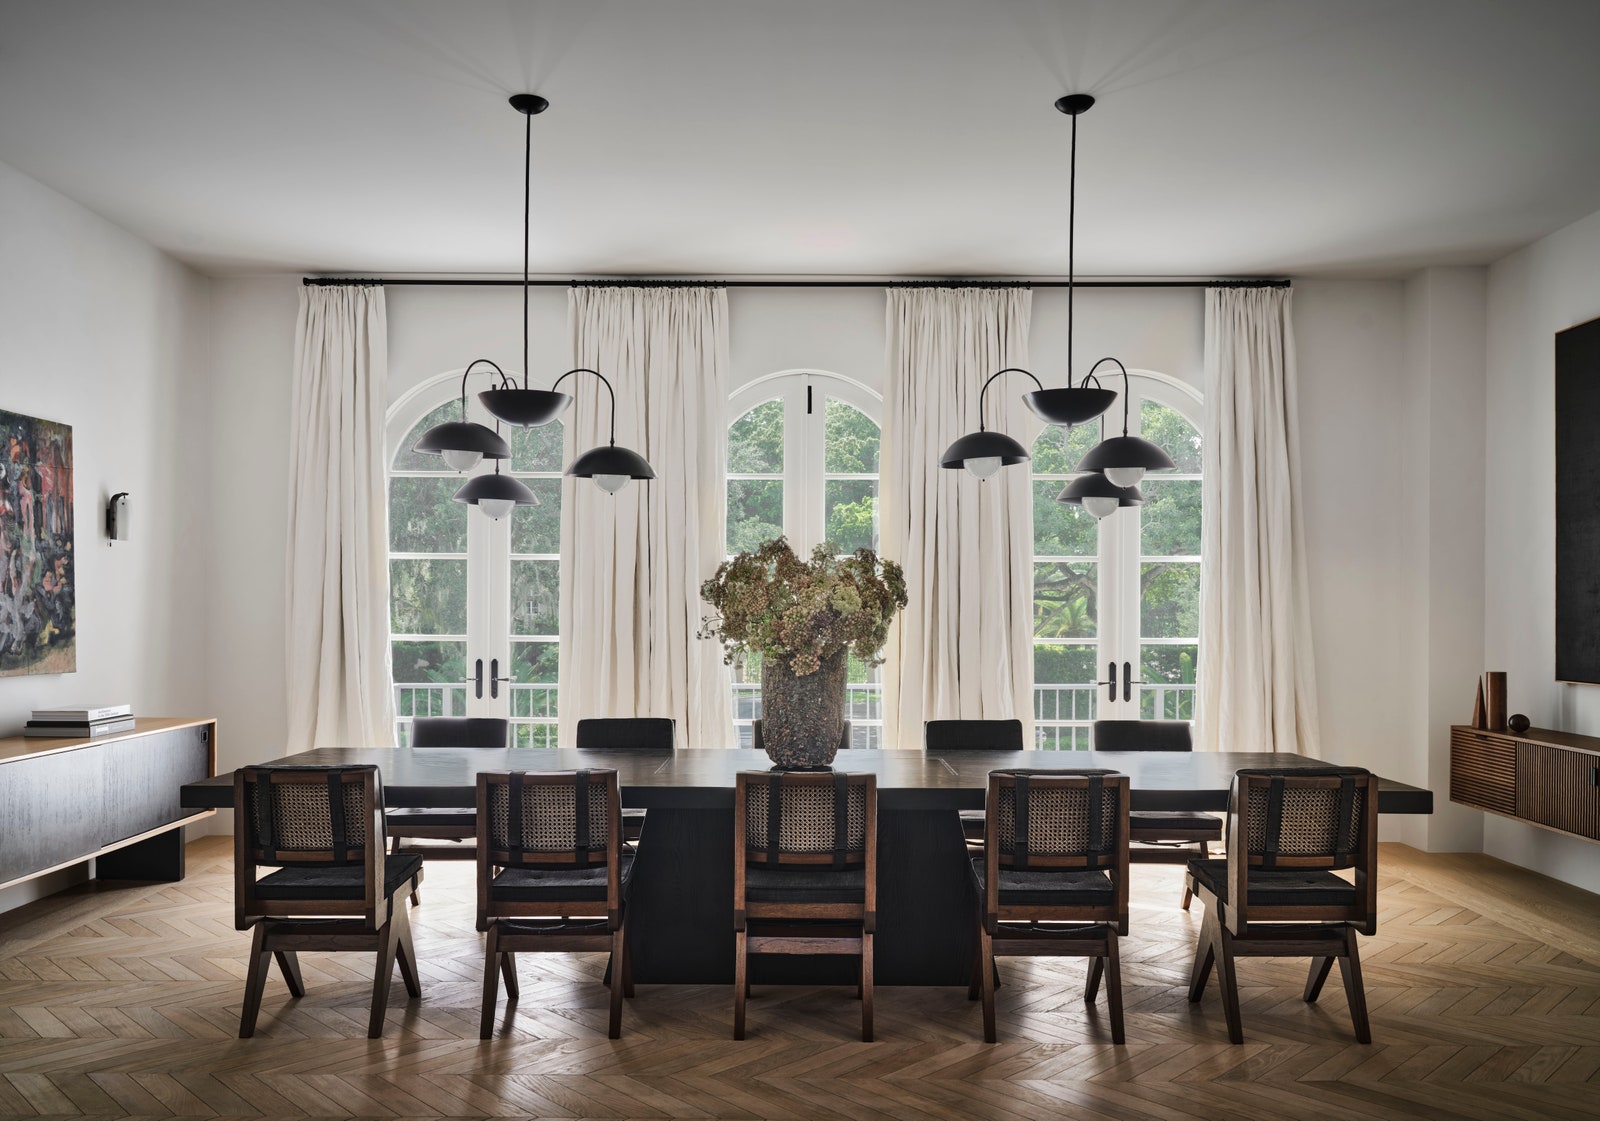 Dining room with long dining table five chairs on each side three arched french doors two pendant lights overhead